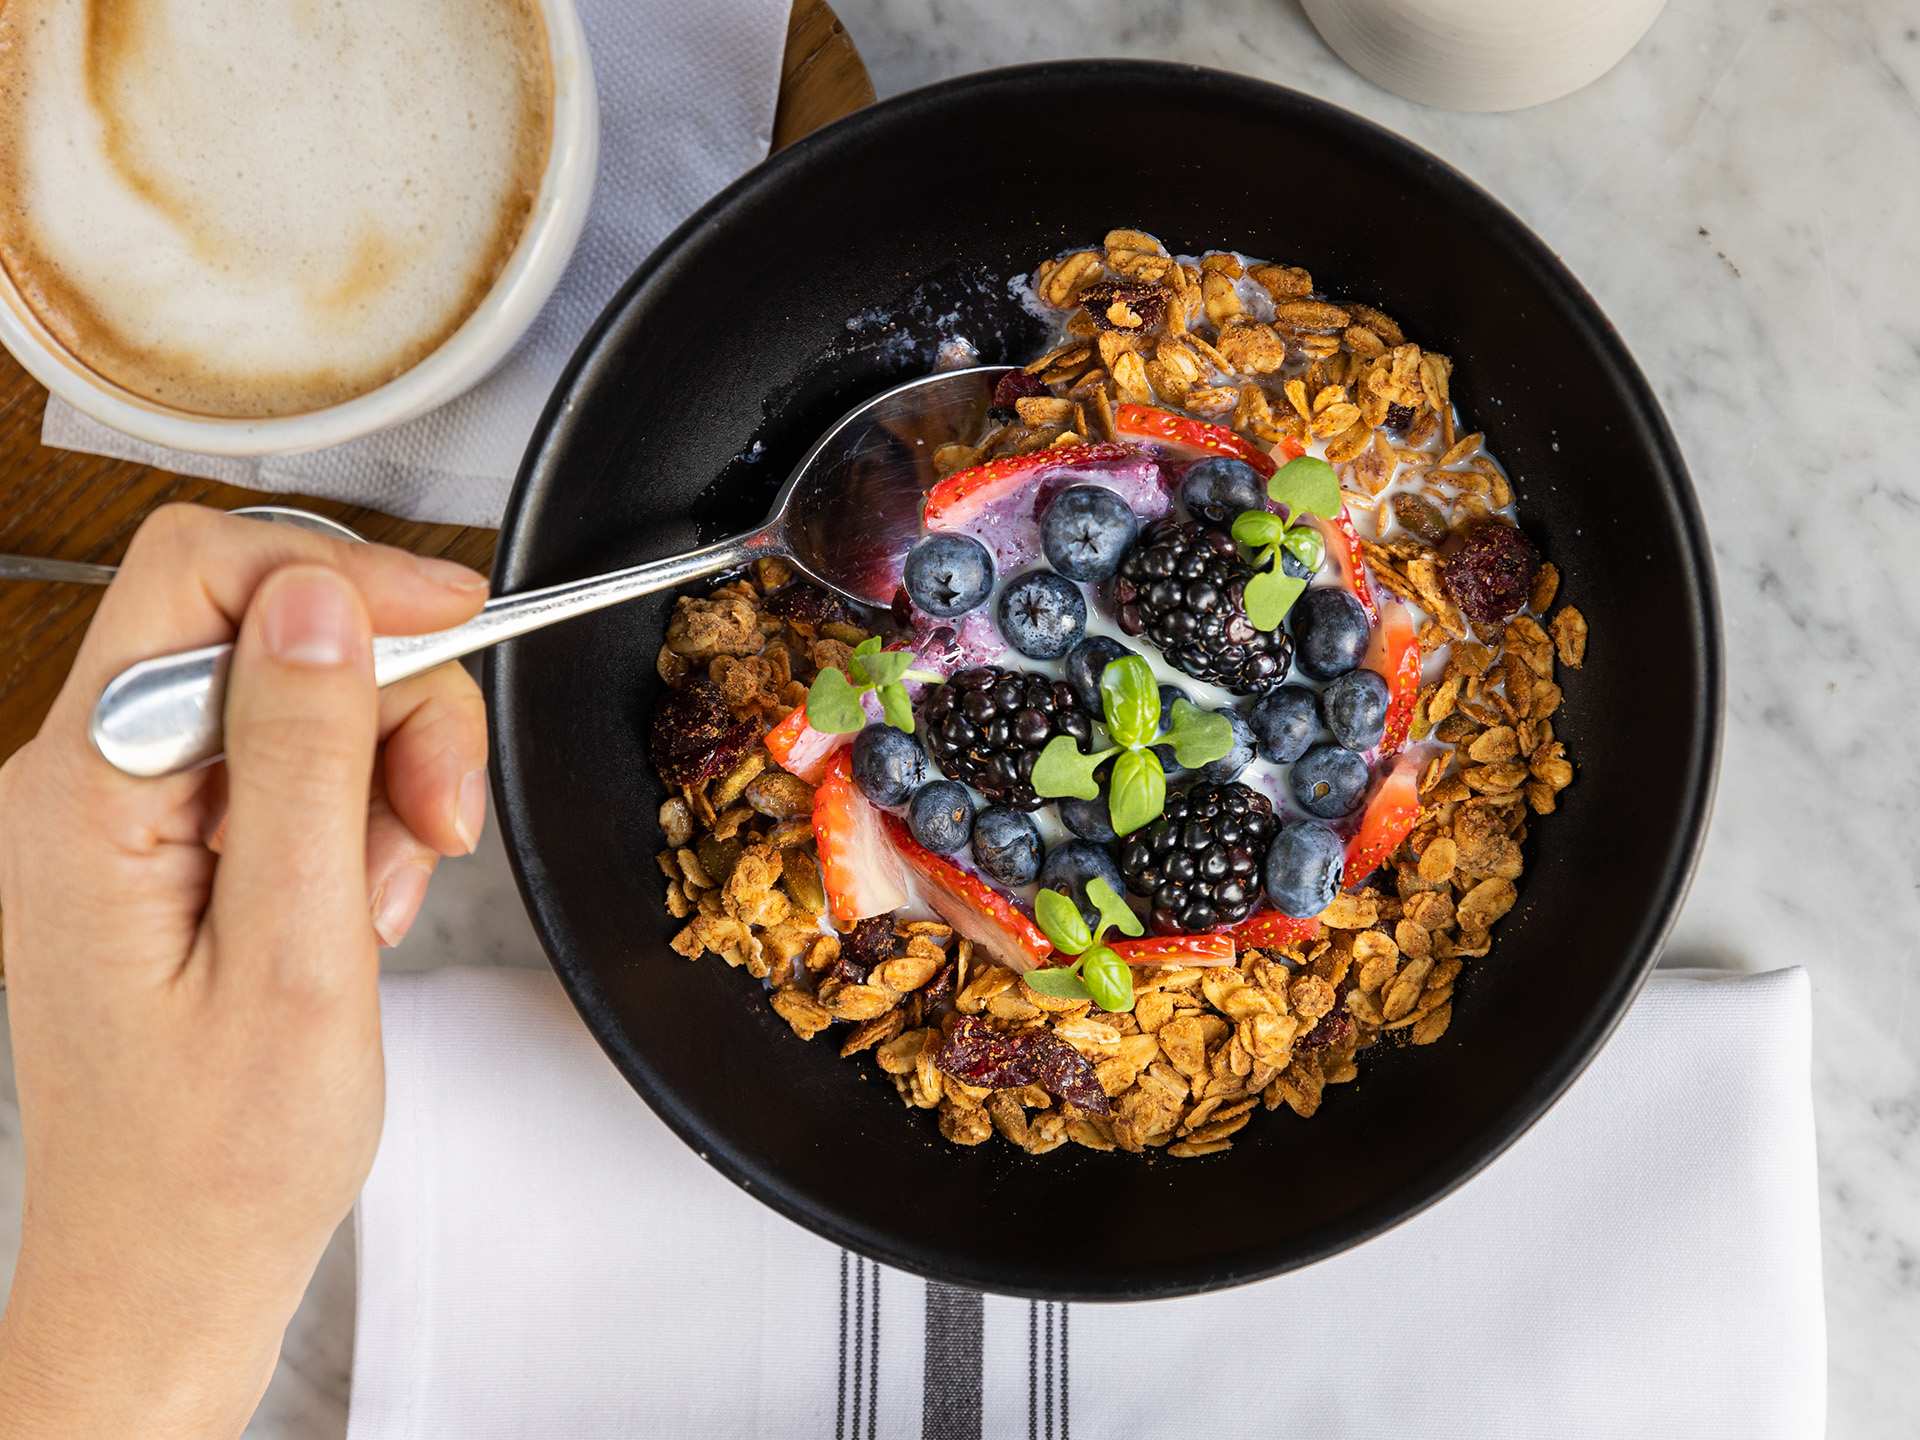 Best brunch in Toronto | Bowl of granola and blueberries for brunch at LOV in Toronto